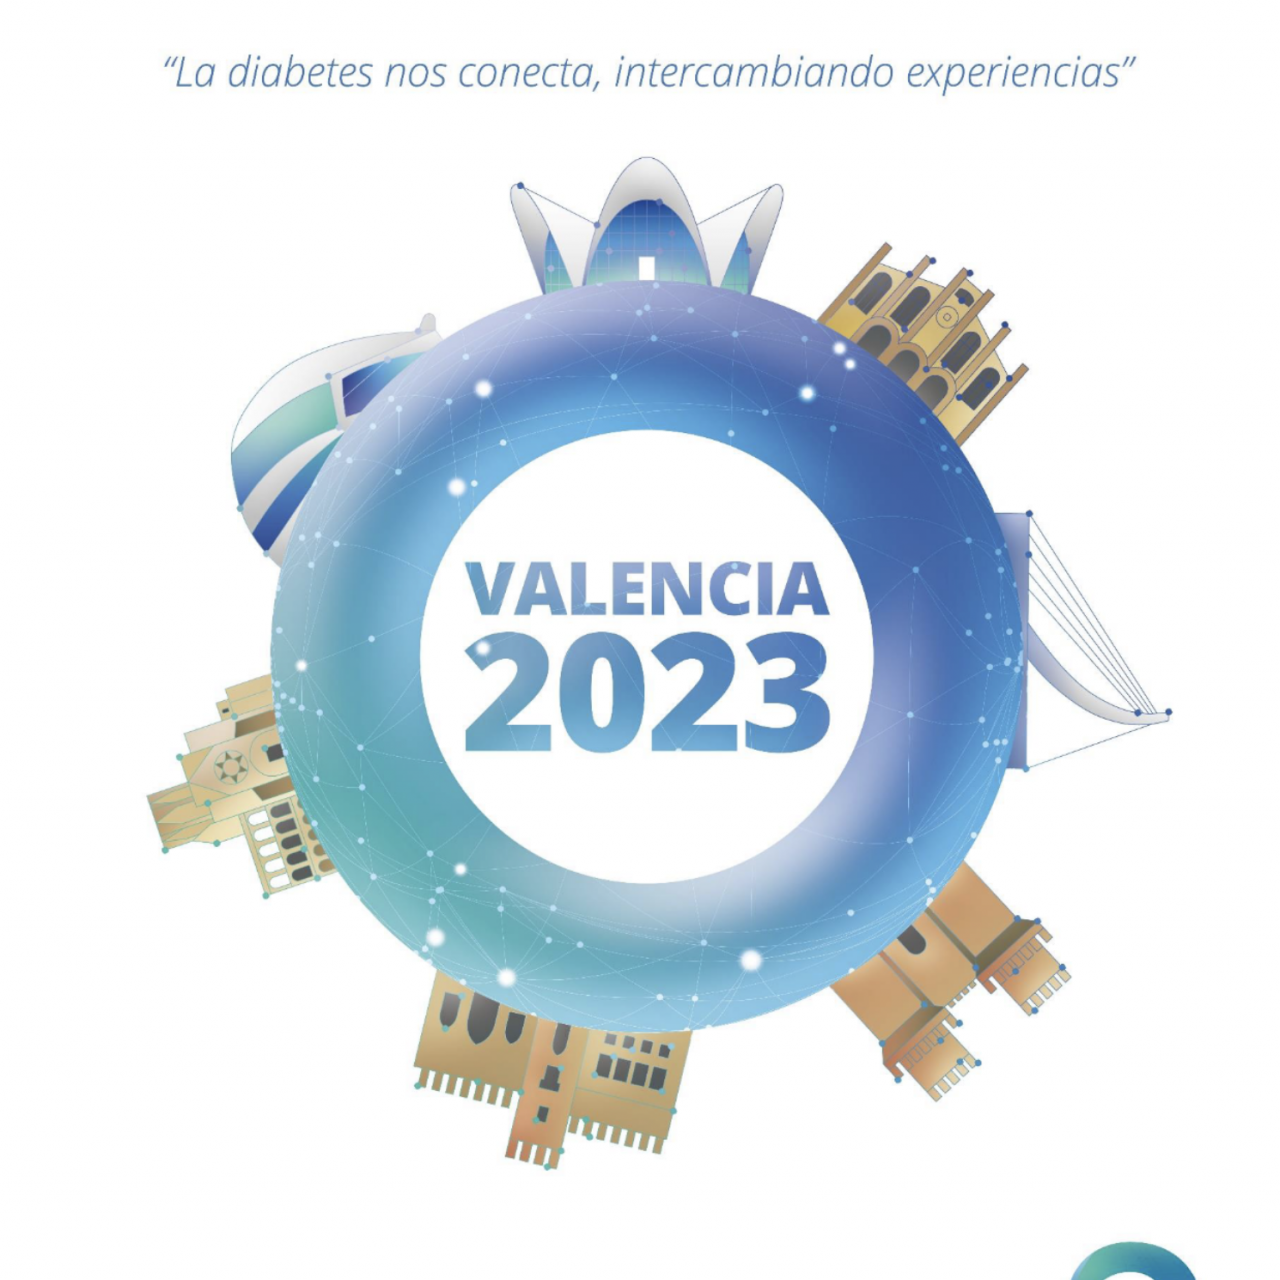 Prof. Eckel at the 34th Scientific Meeting of the Spanish Diabetes Society Meeting